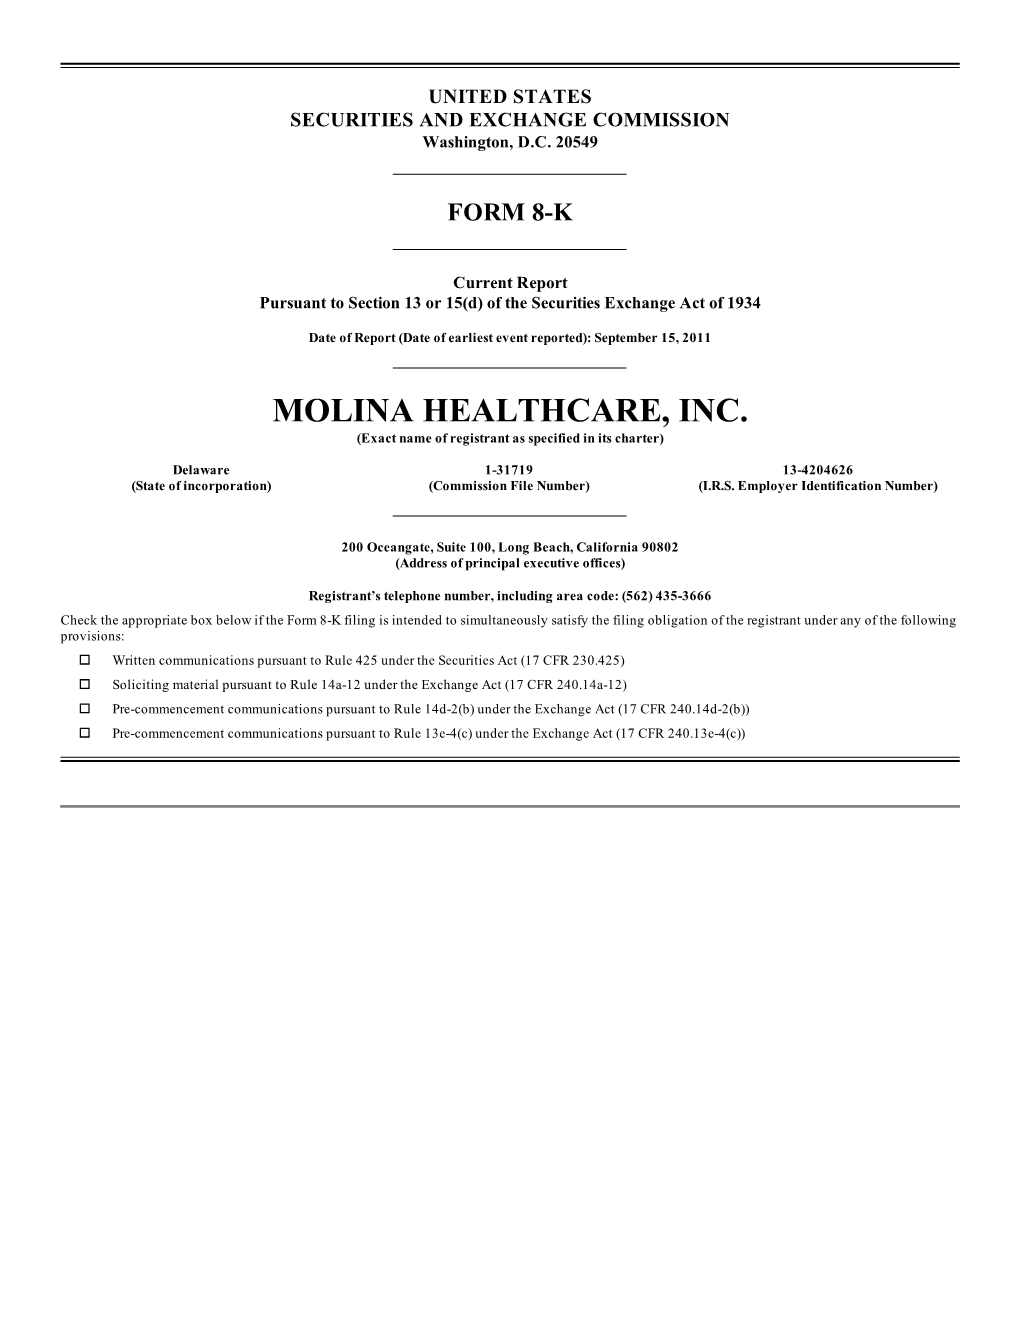 MOLINA HEALTHCARE, INC. (Exact Name of Registrant As Specified in Its Charter)